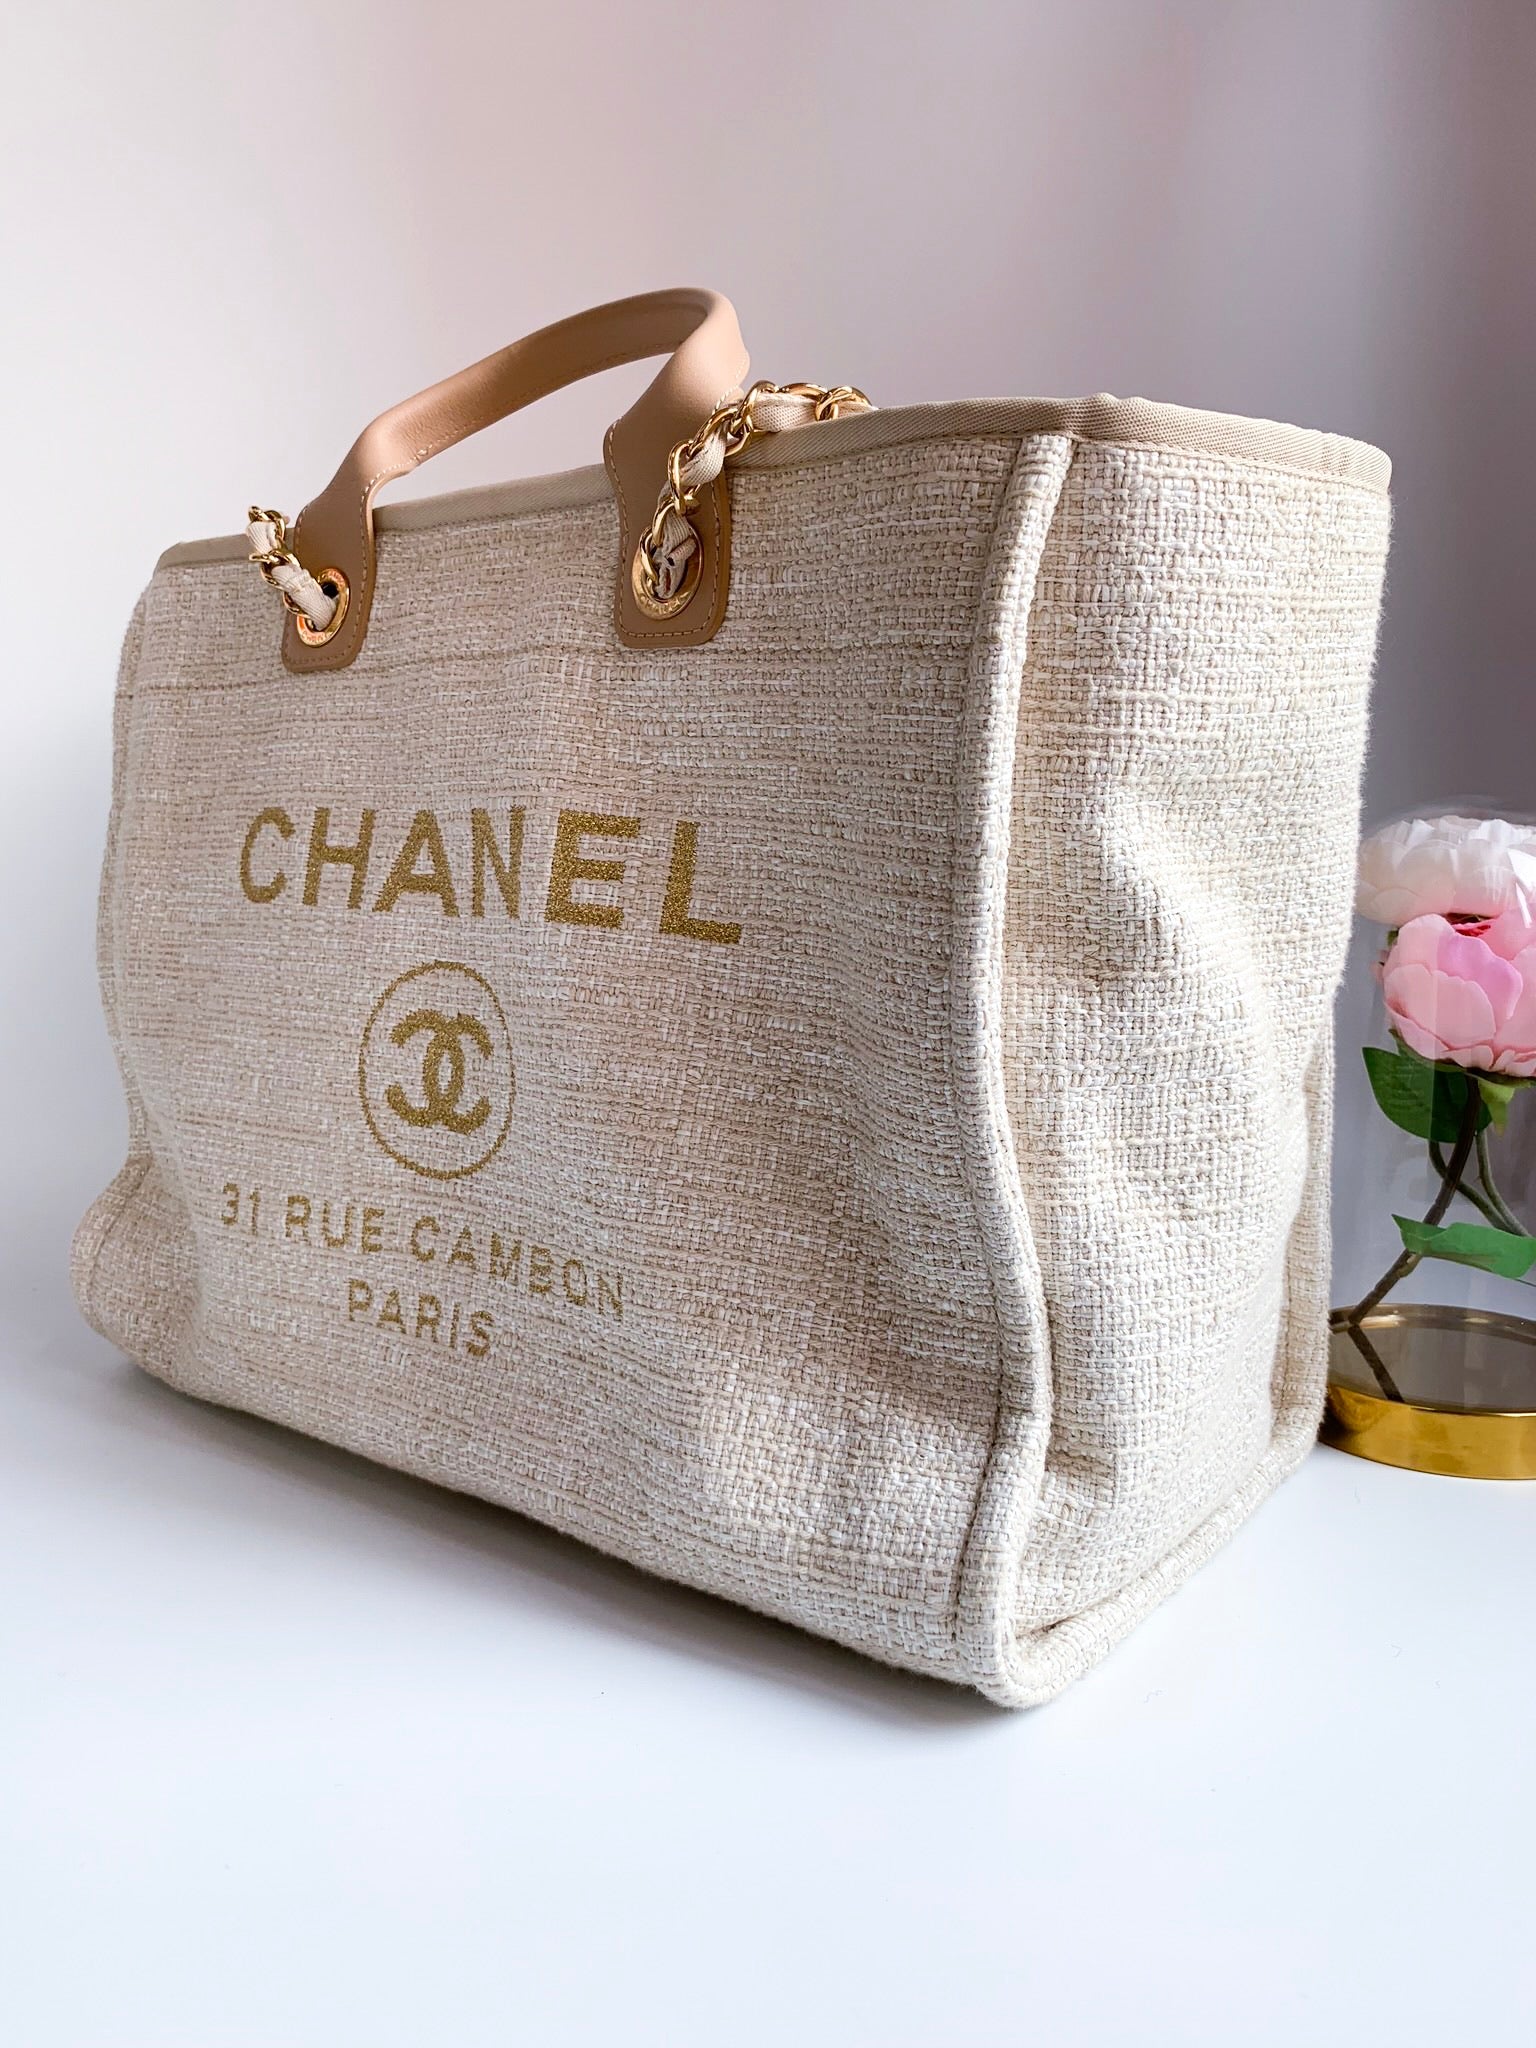 Chanel 31 Rue Cambon Tote Bag Auction